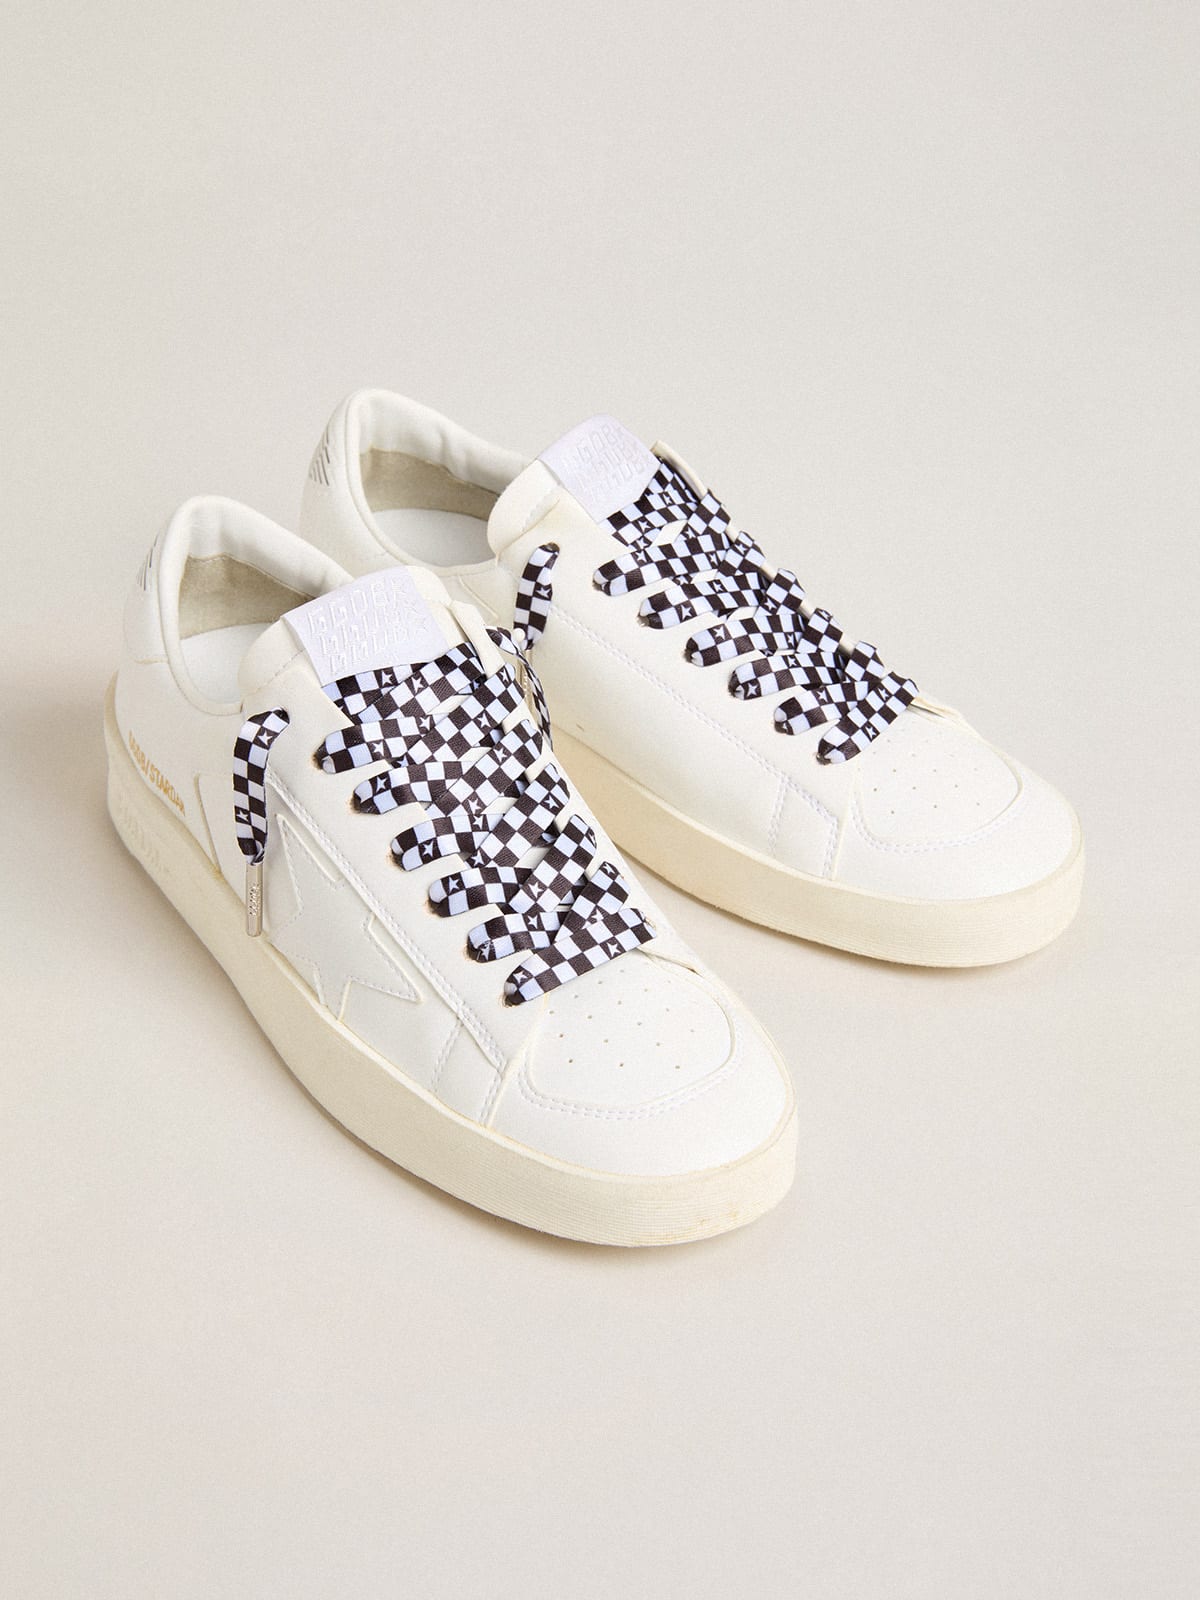 Black and white checkerboard cotton laces with white stars | Golden Goose